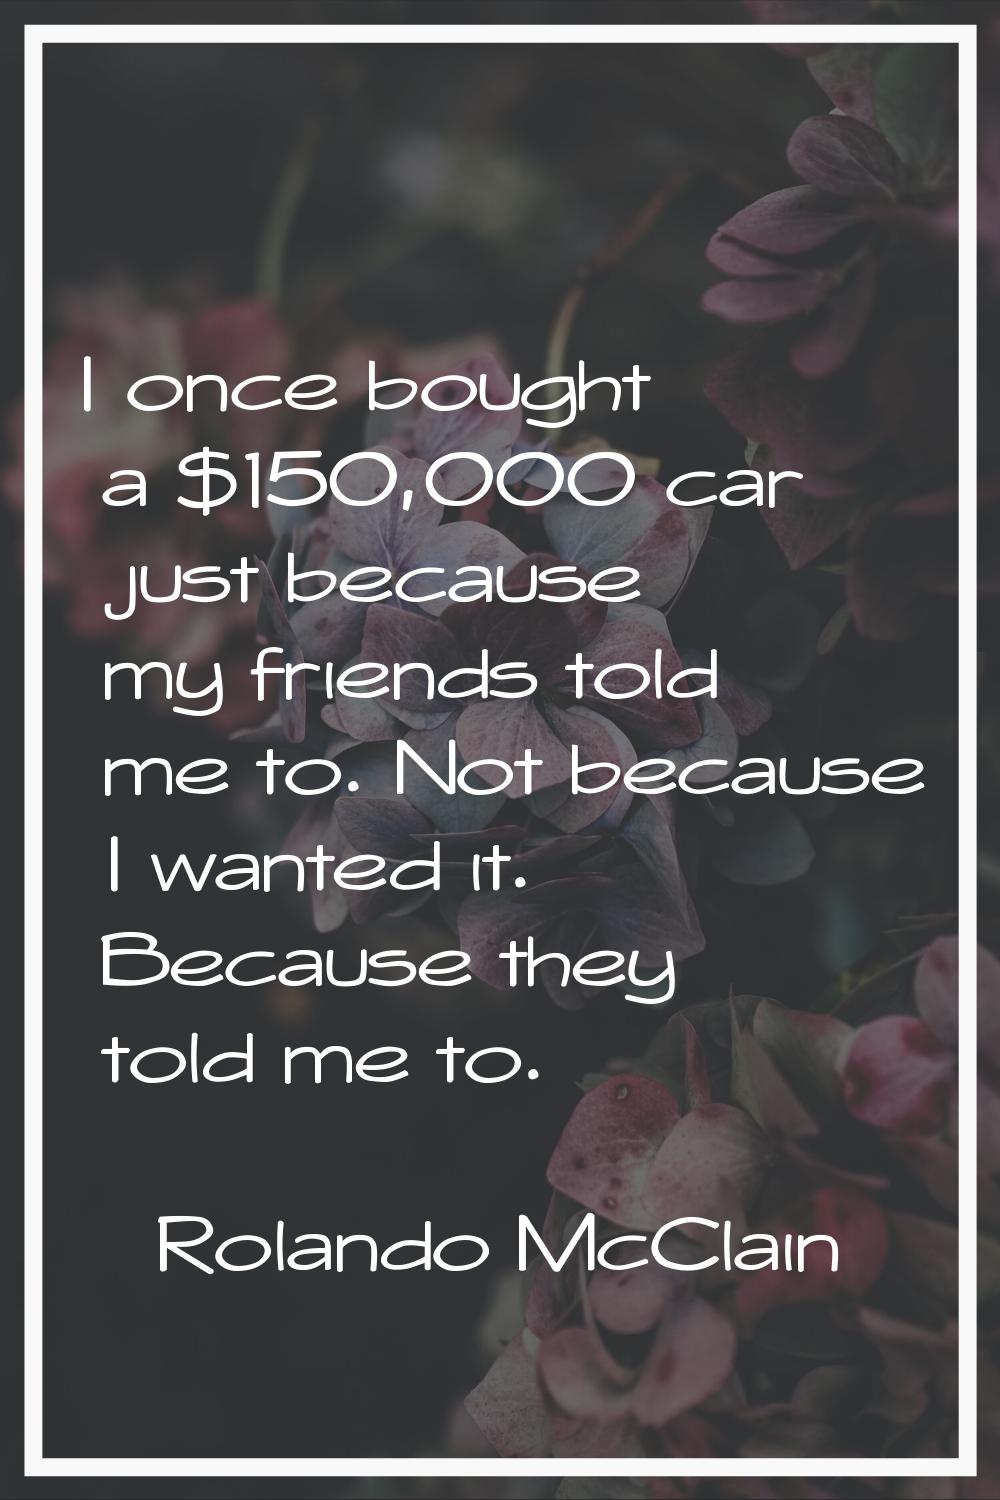 I once bought a $150,000 car just because my friends told me to. Not because I wanted it. Because t